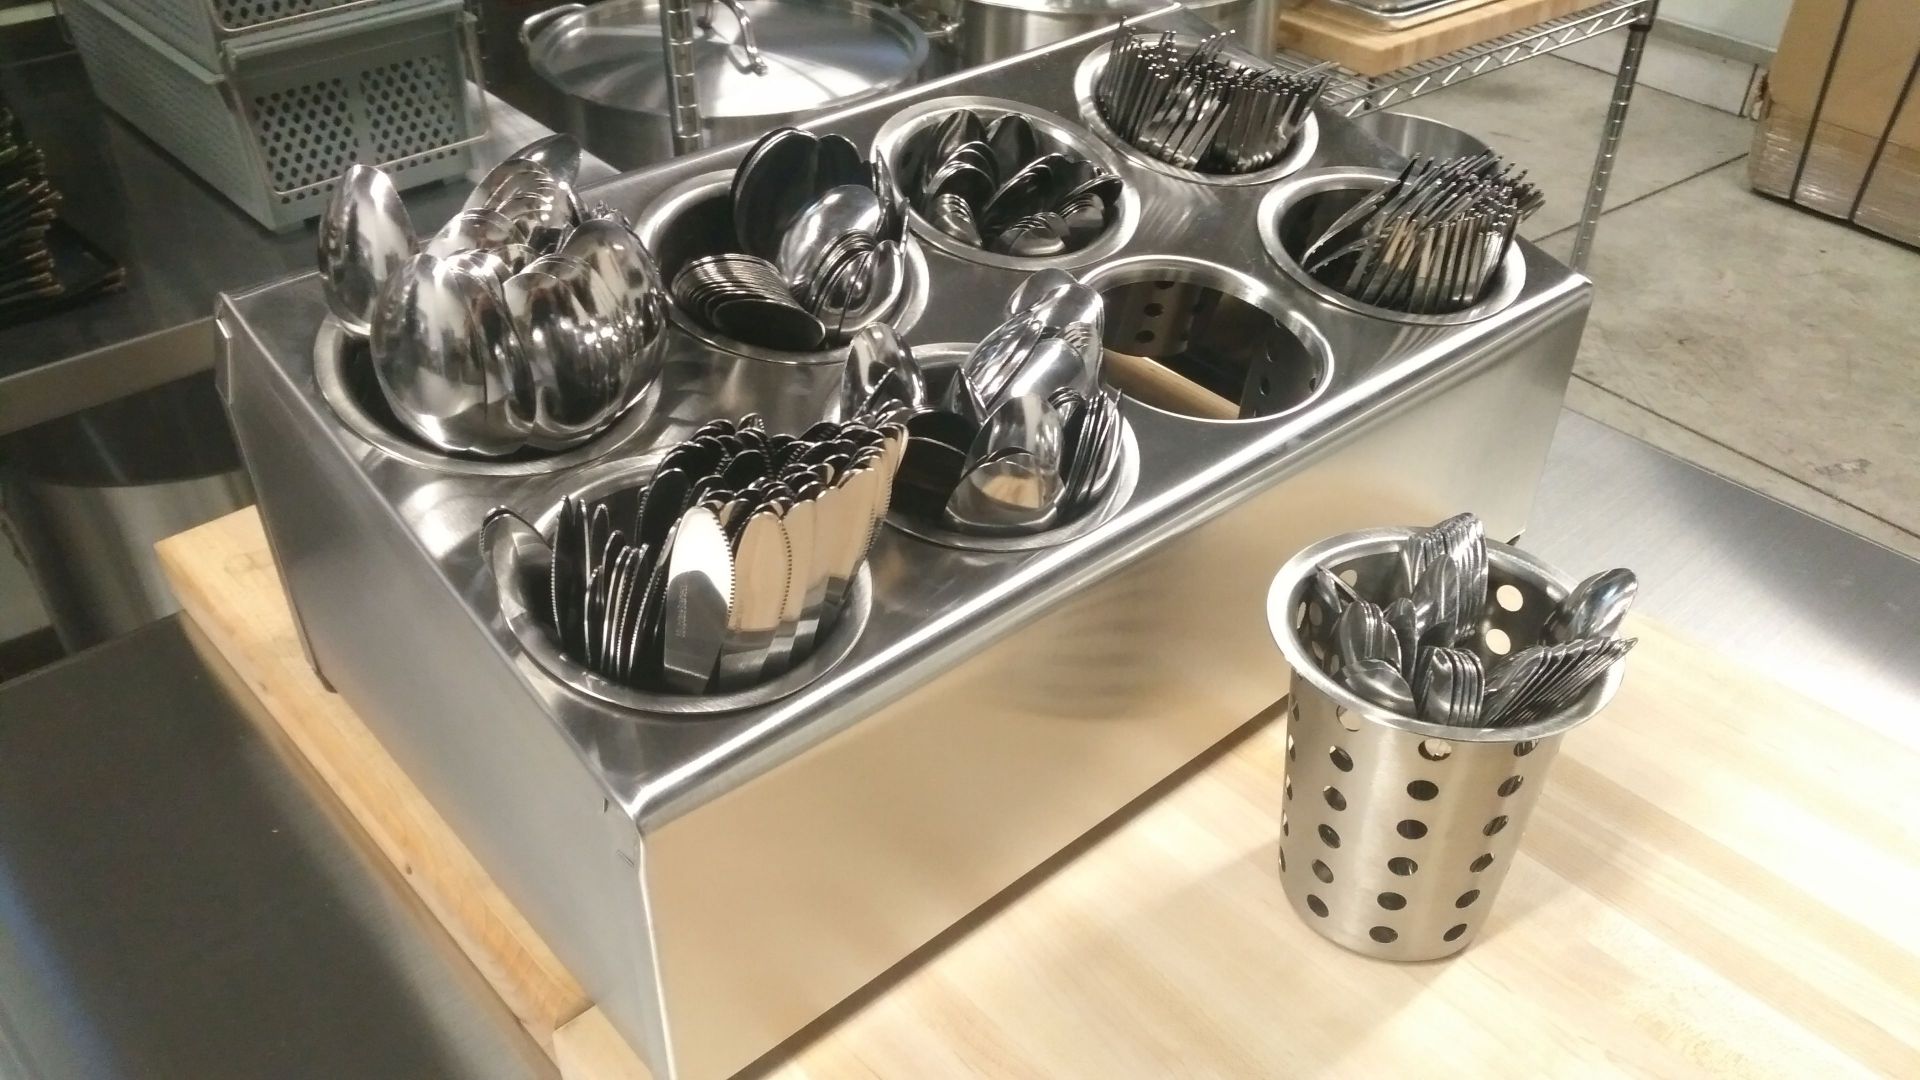 8 Compartment - 324 Piece Cutlery Set with Stainless Bin & Inserts - Image 2 of 4